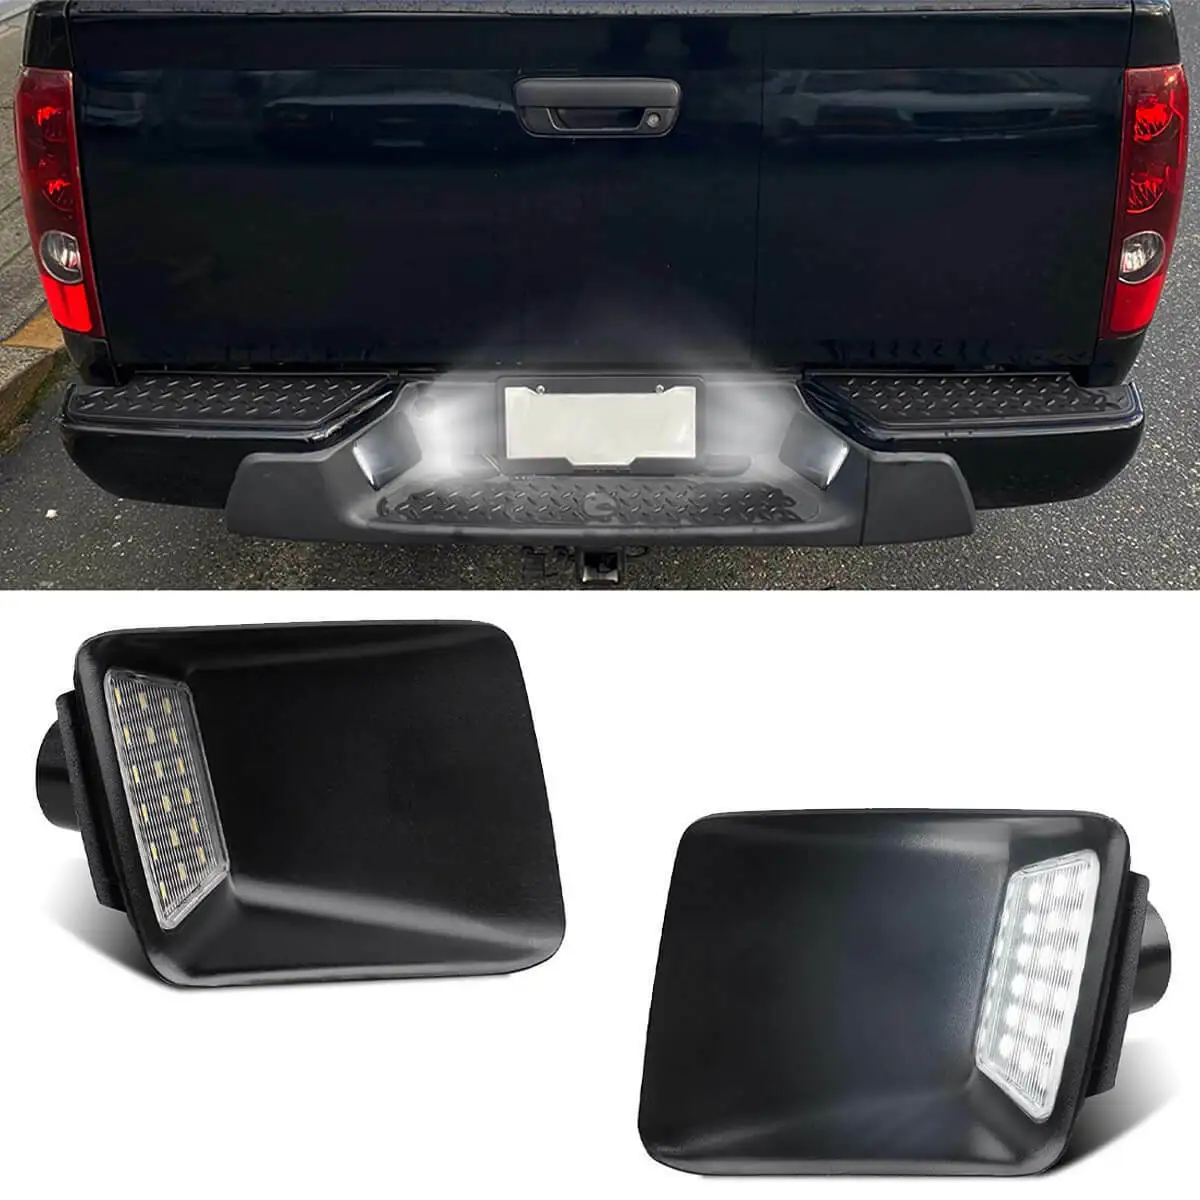 

LED License Plate Light Tag Lamp Assembly Compatible with 2004-2012 Chevy Colorado GMC Canyon Pickup, 6000K White, 1pair